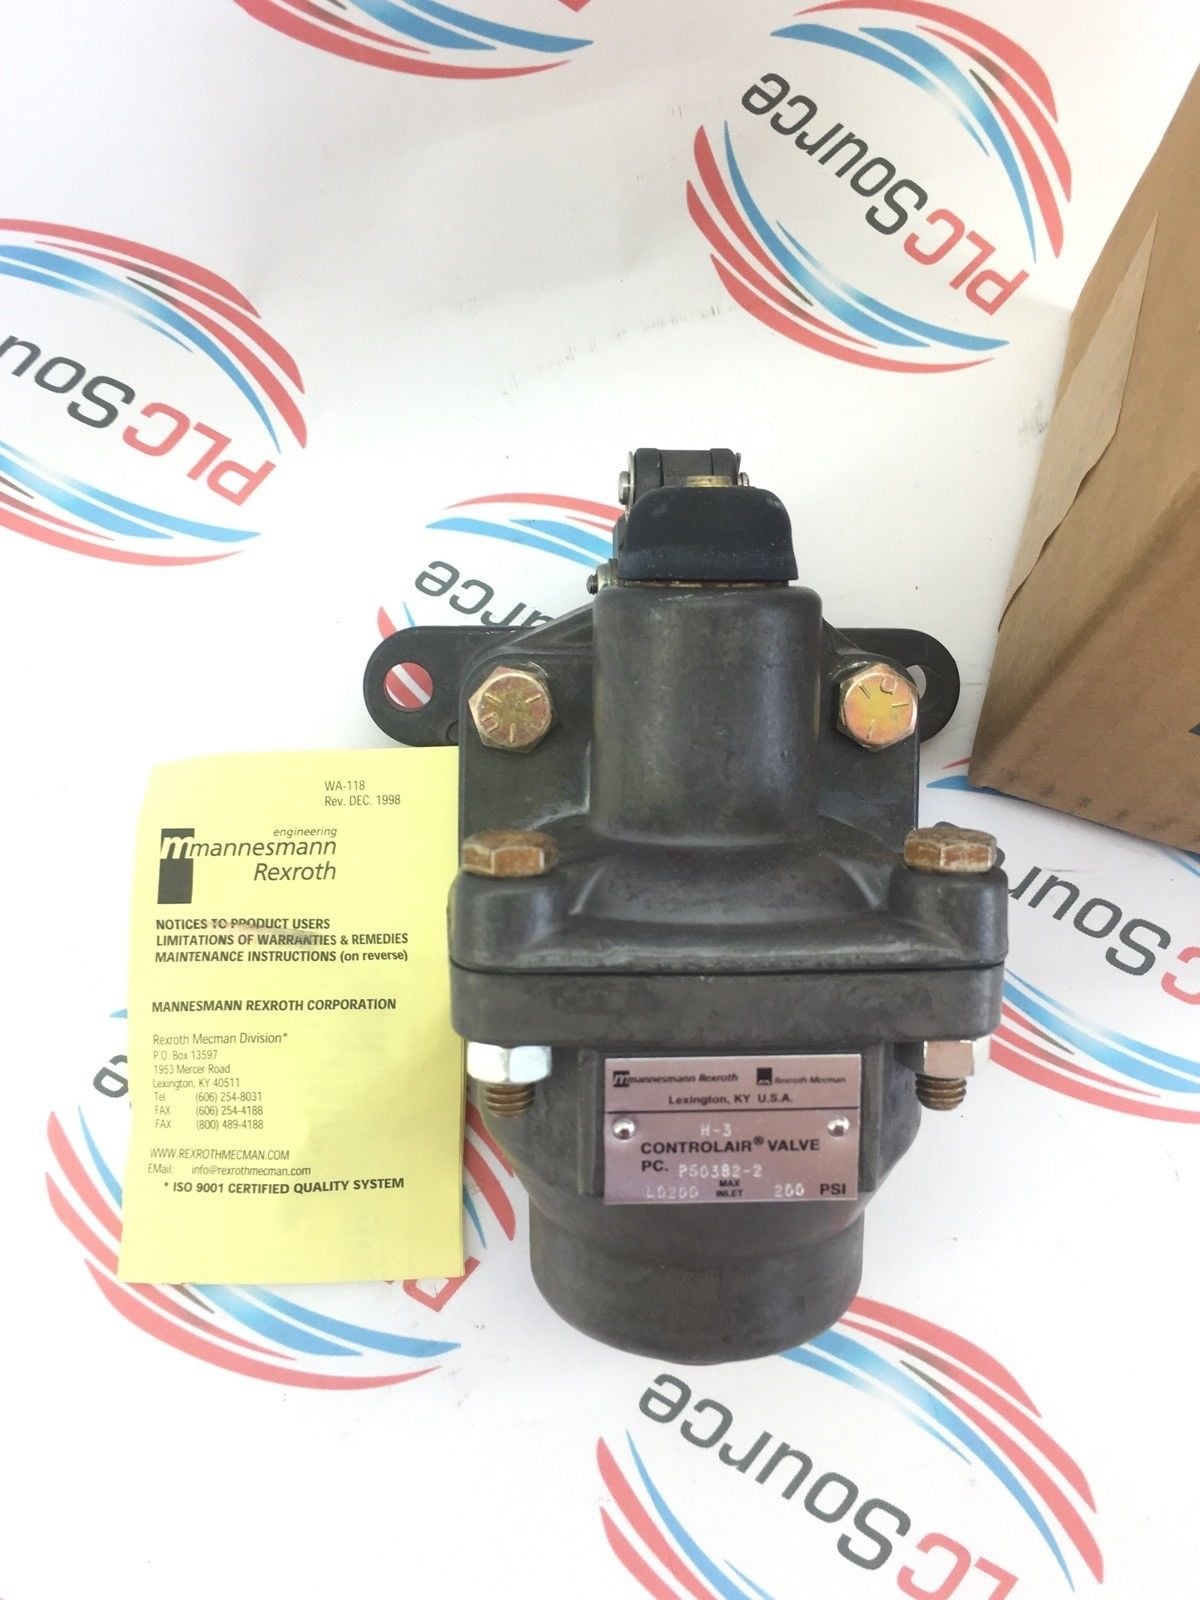 AS PICTURED UNMP Details about   REXROTH P68973-3030 200PSI 